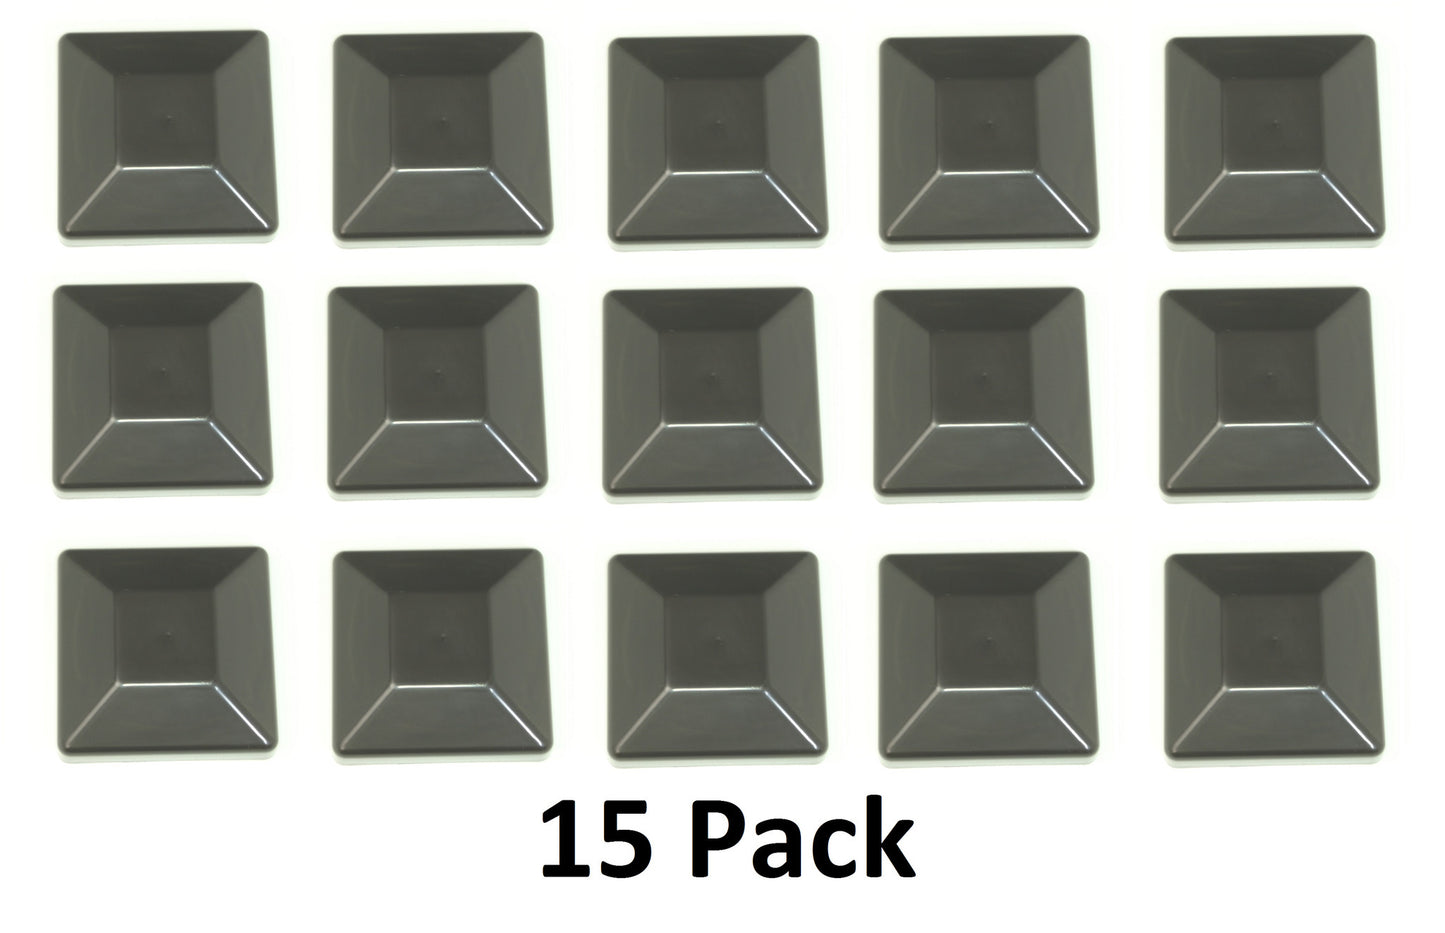 4x4 Nominal (3-5/8"x 3-5/8") Black Plastic Fence Post Caps with a smooth flat top